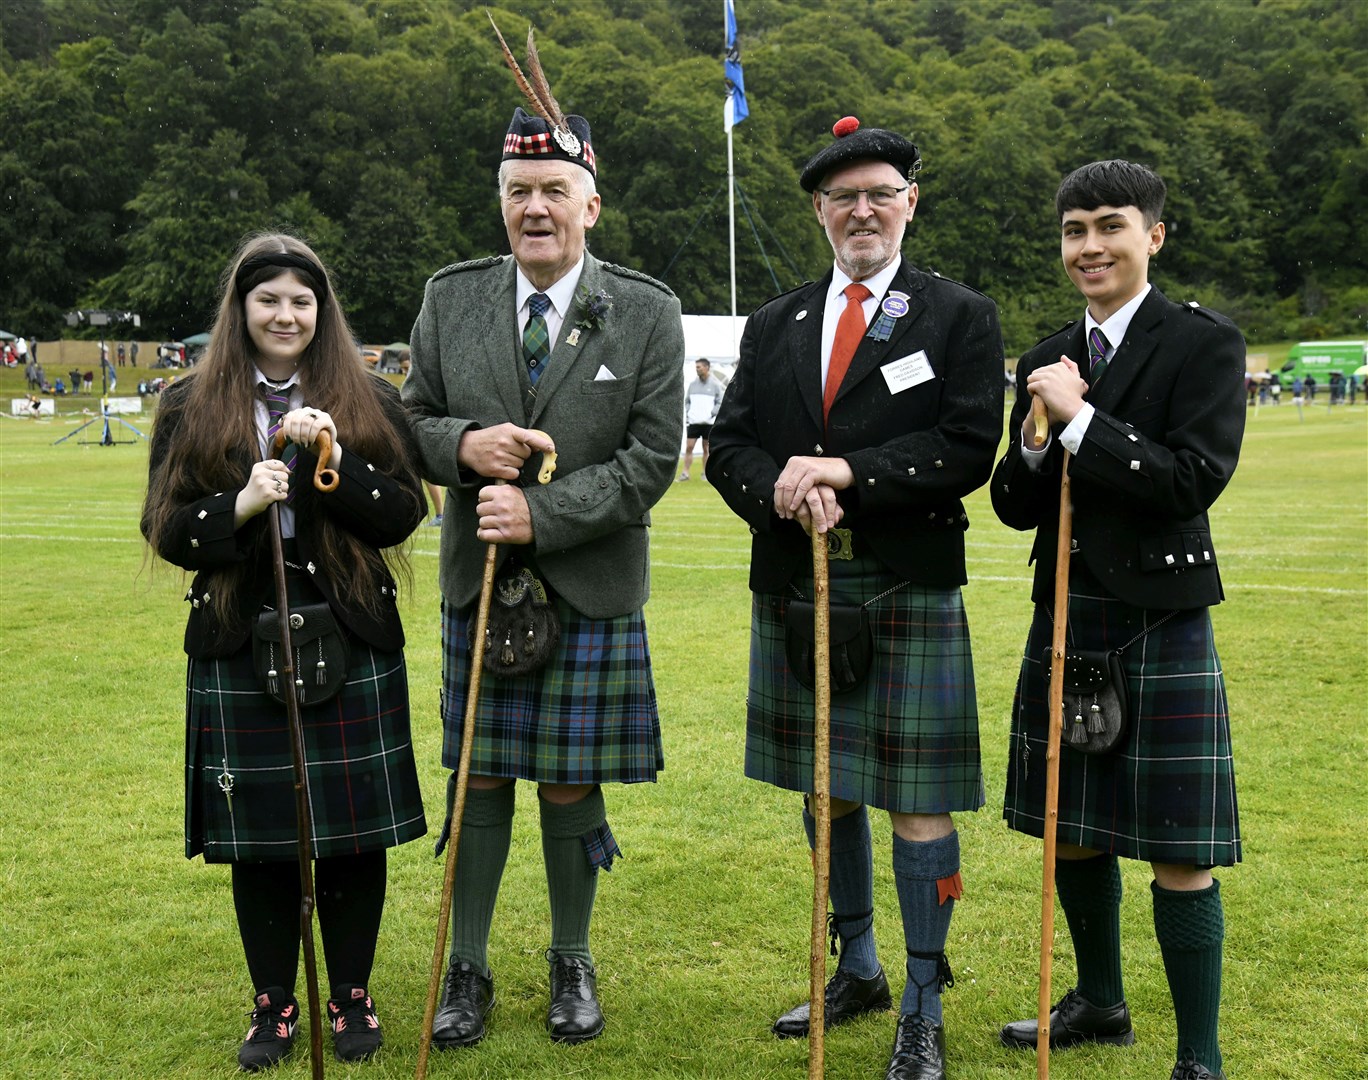 Junior chieftain James McPartlin, Forres Highland Games president Fred Davidson, chieftain George Alexander and junior chieftain Amy McGhee at last year's event.